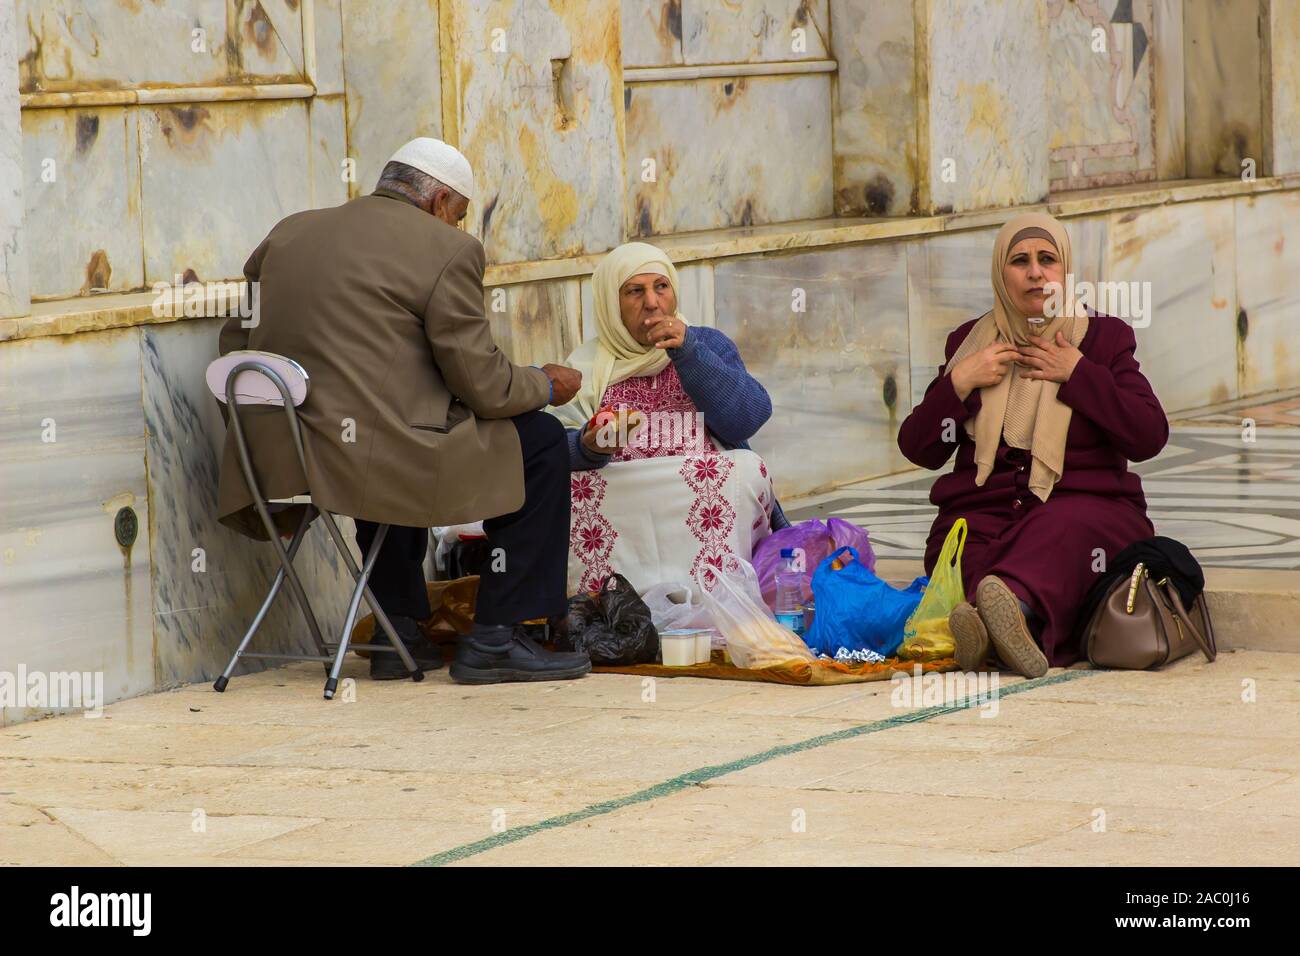 10 may 2018. An Arab man and two lady companions catch a light meal during a visit to the Dome of the Rock mosque in Jerusalem Israel Stock Photo